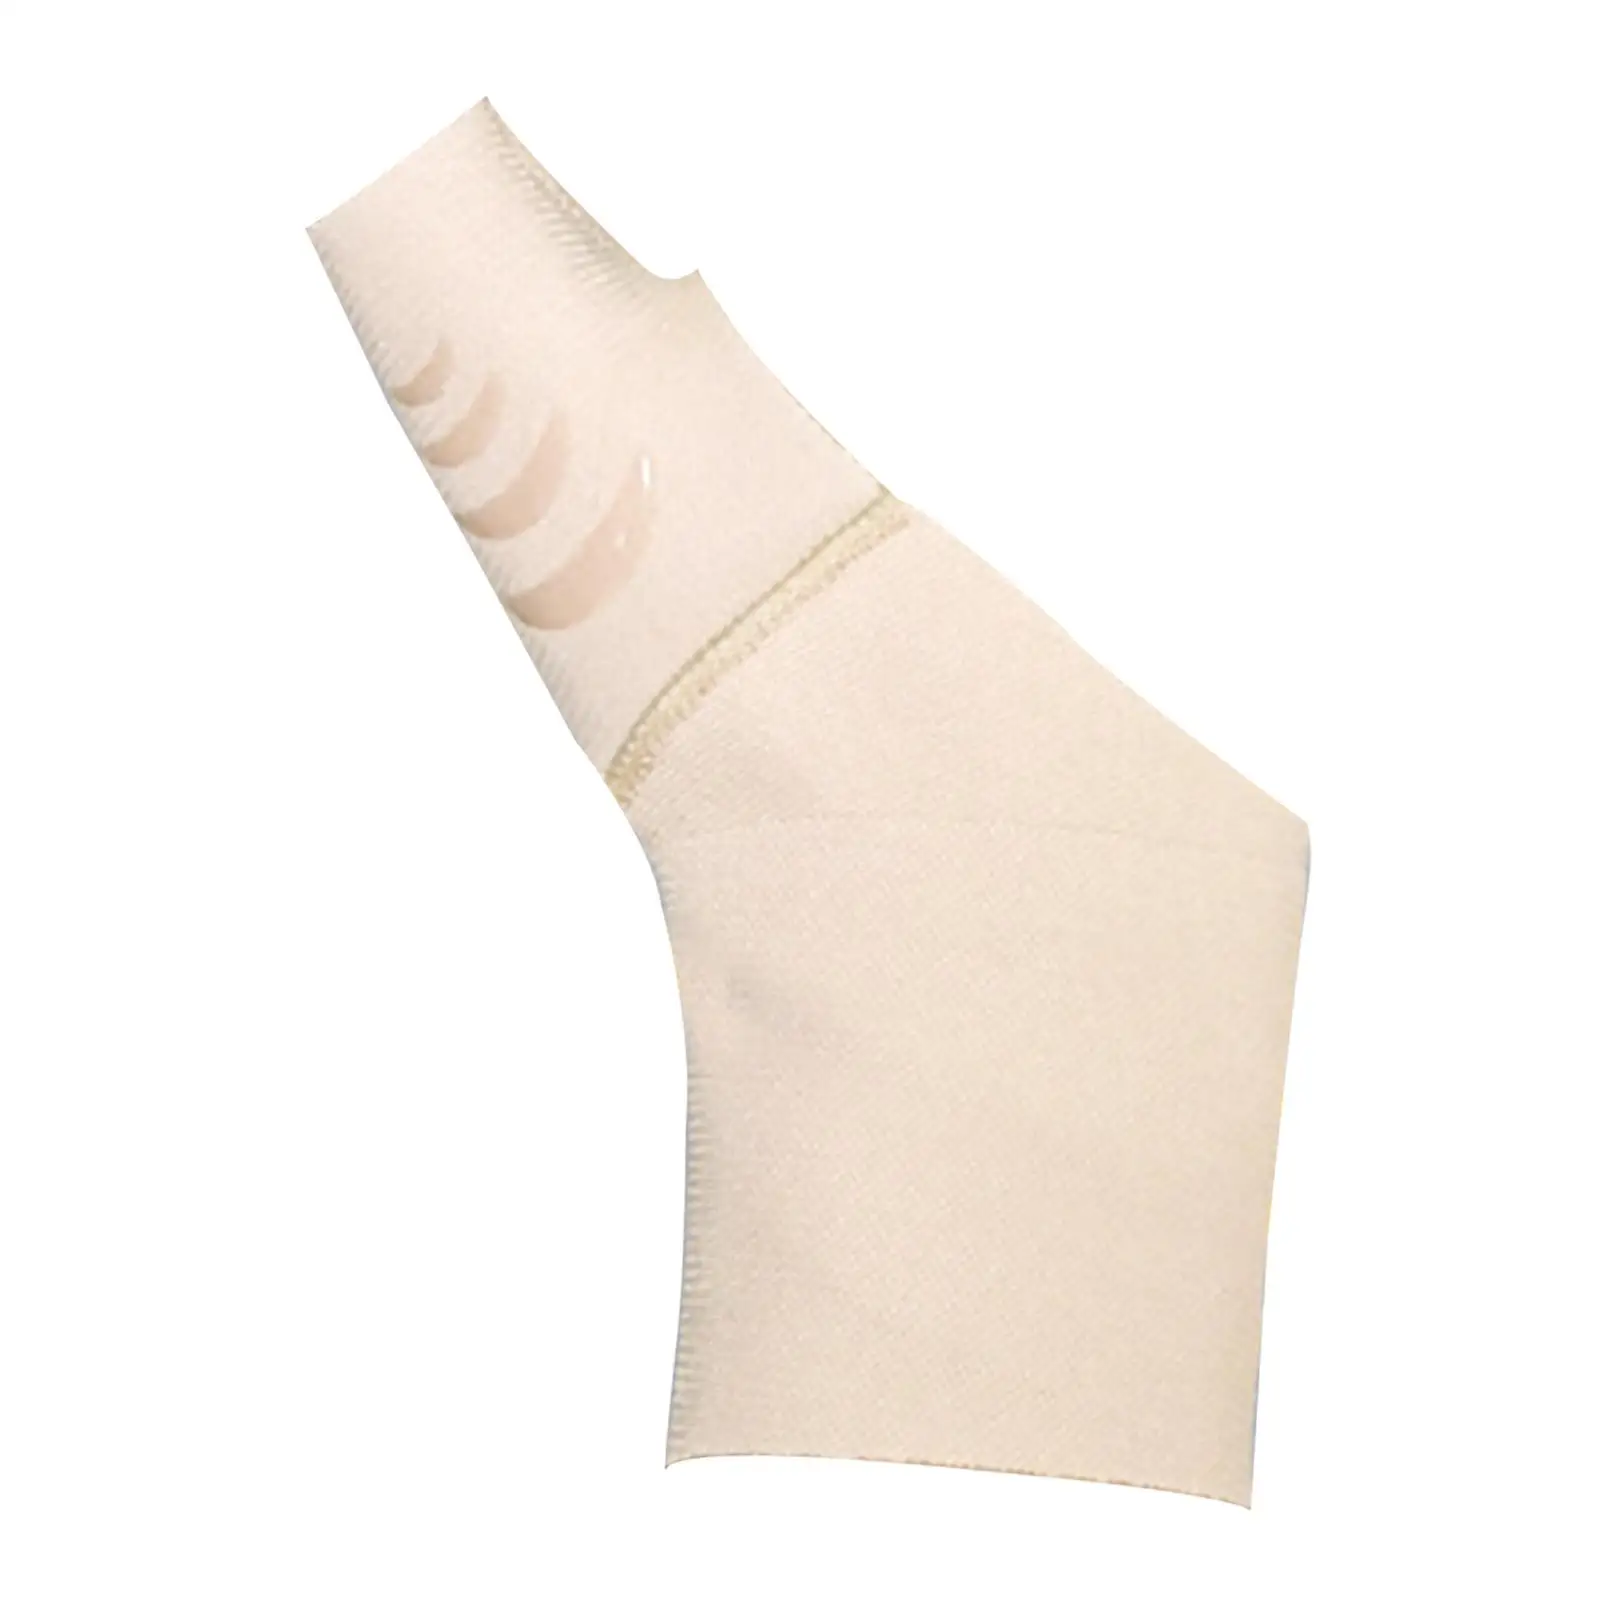 Single Thumb sleeve Soft Silicone Protector Removable Elastic Thumb Cover Support Brace Stabiliser for Basketball Carpal